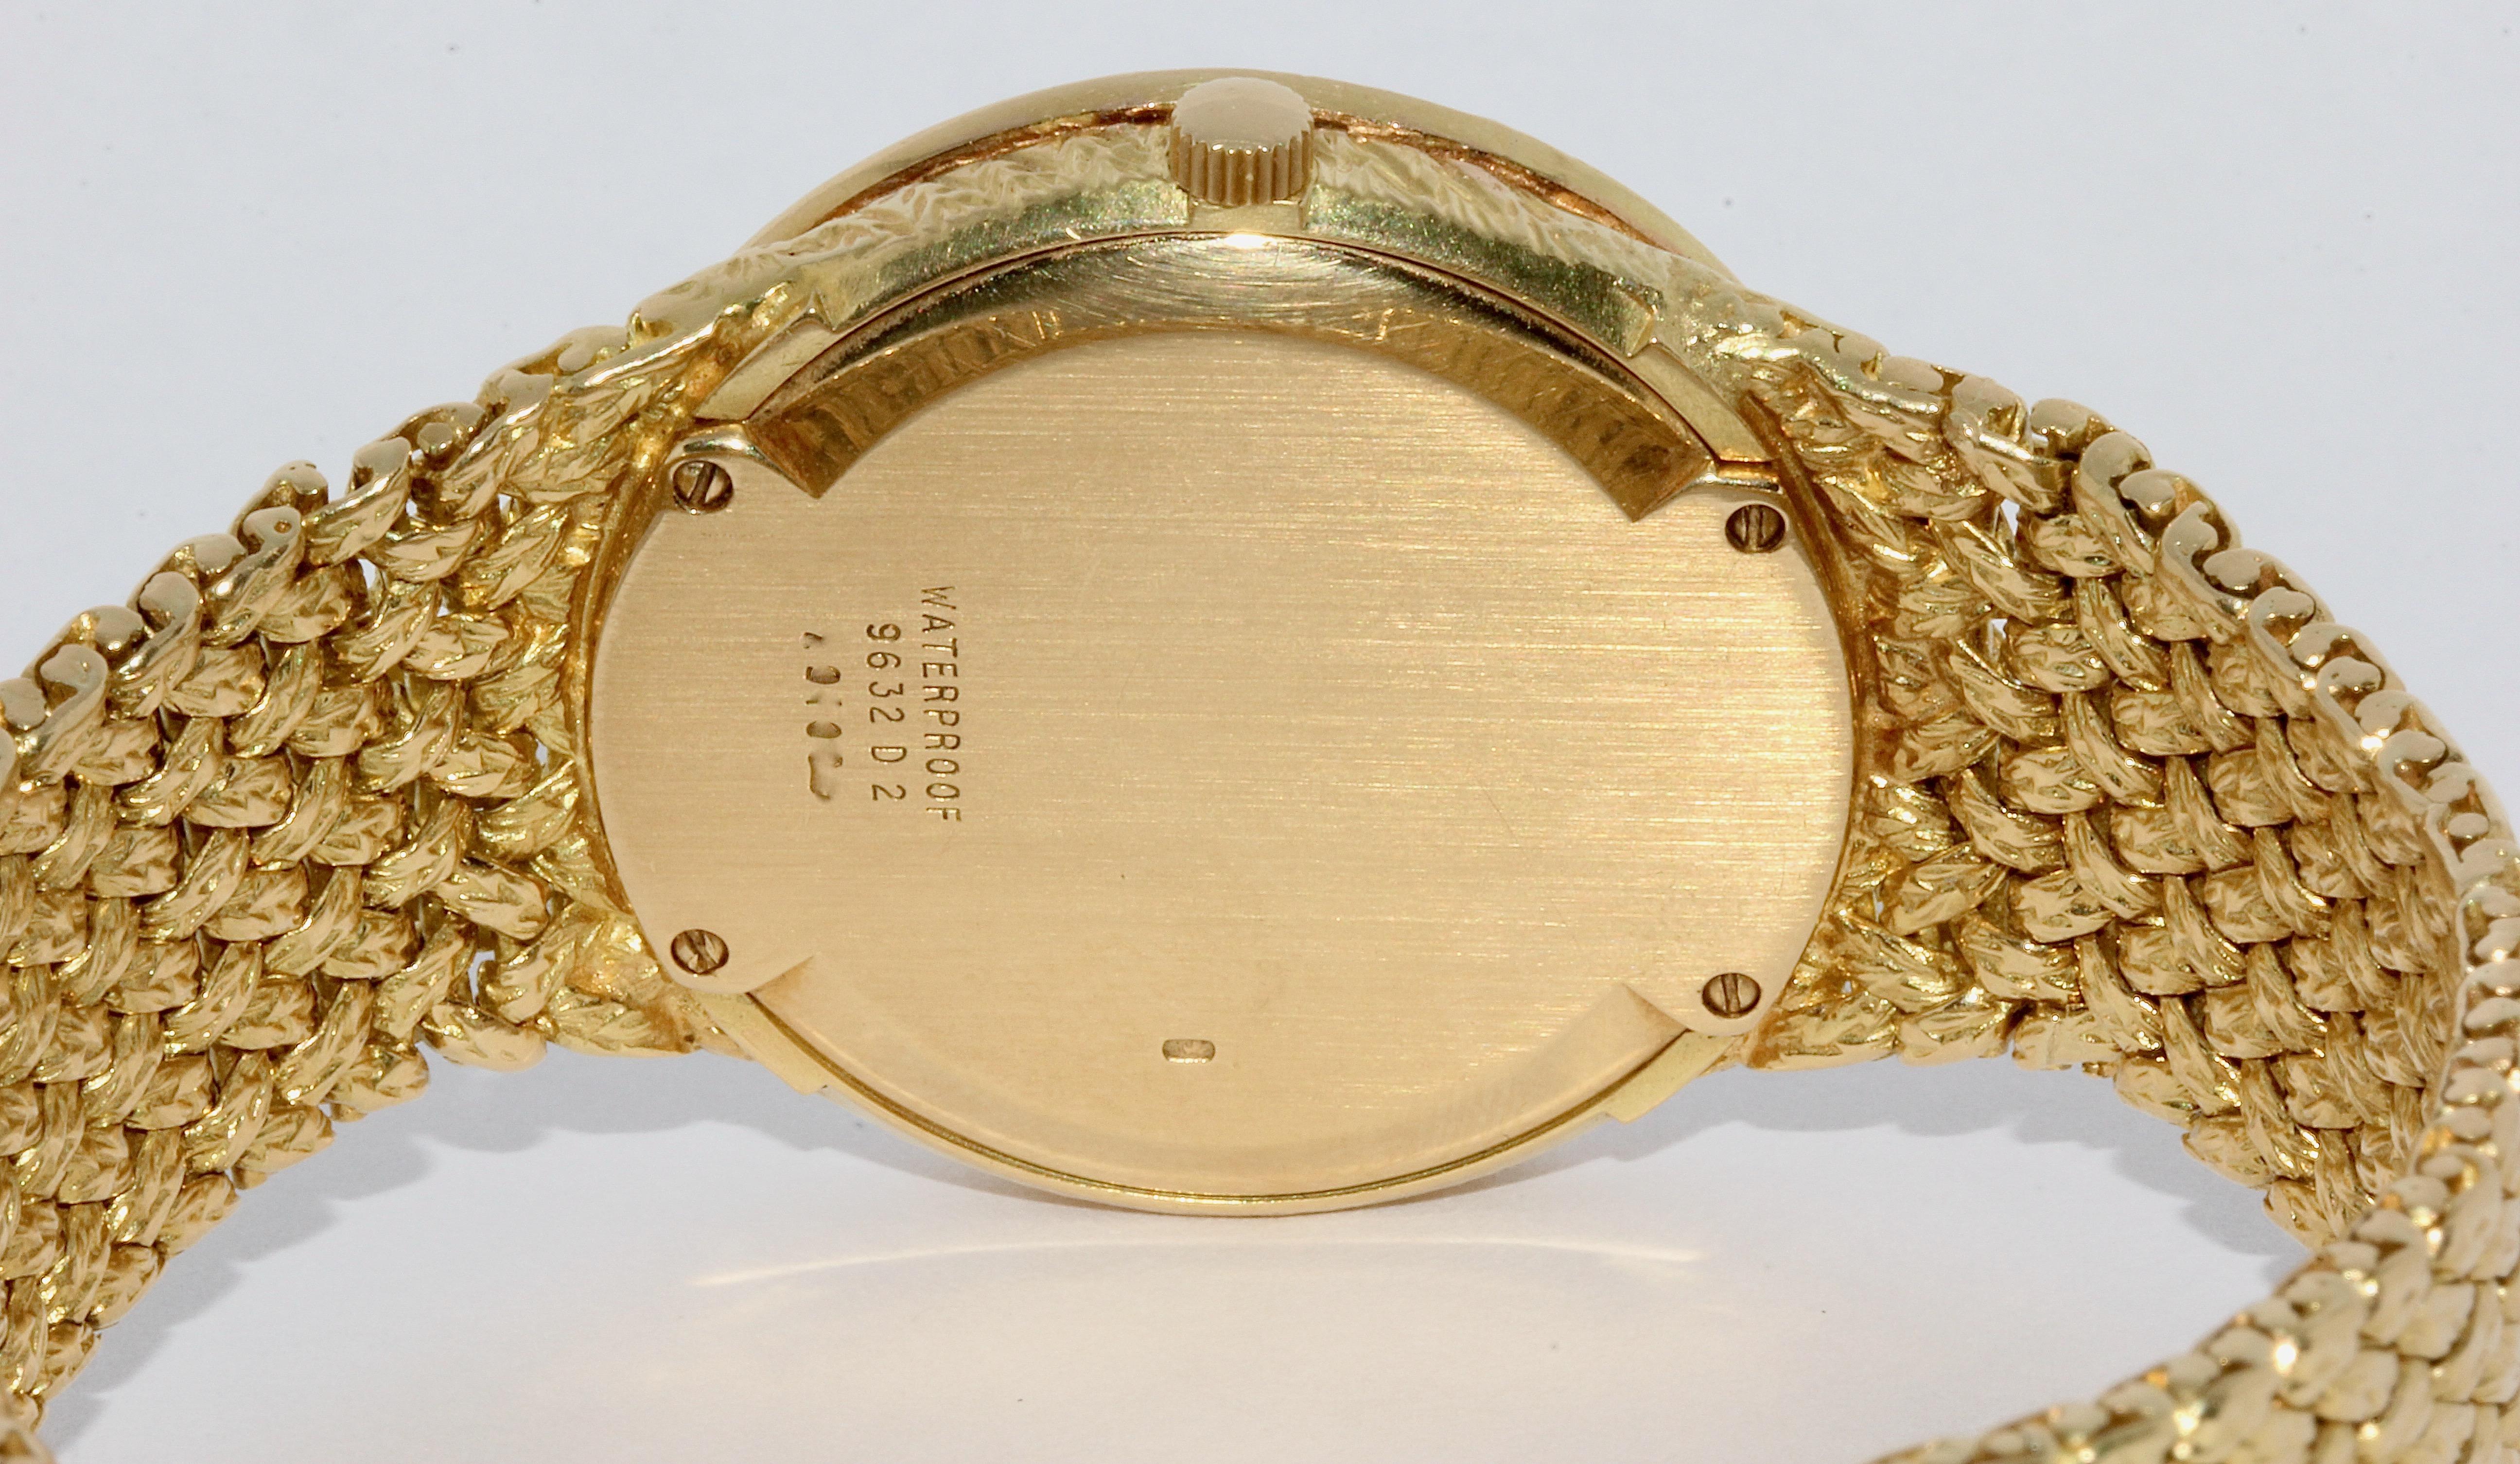 Heavy Ladies Wristwatch by Piaget, 18 Karat Solid Yellow Gold with Diamonds For Sale 1